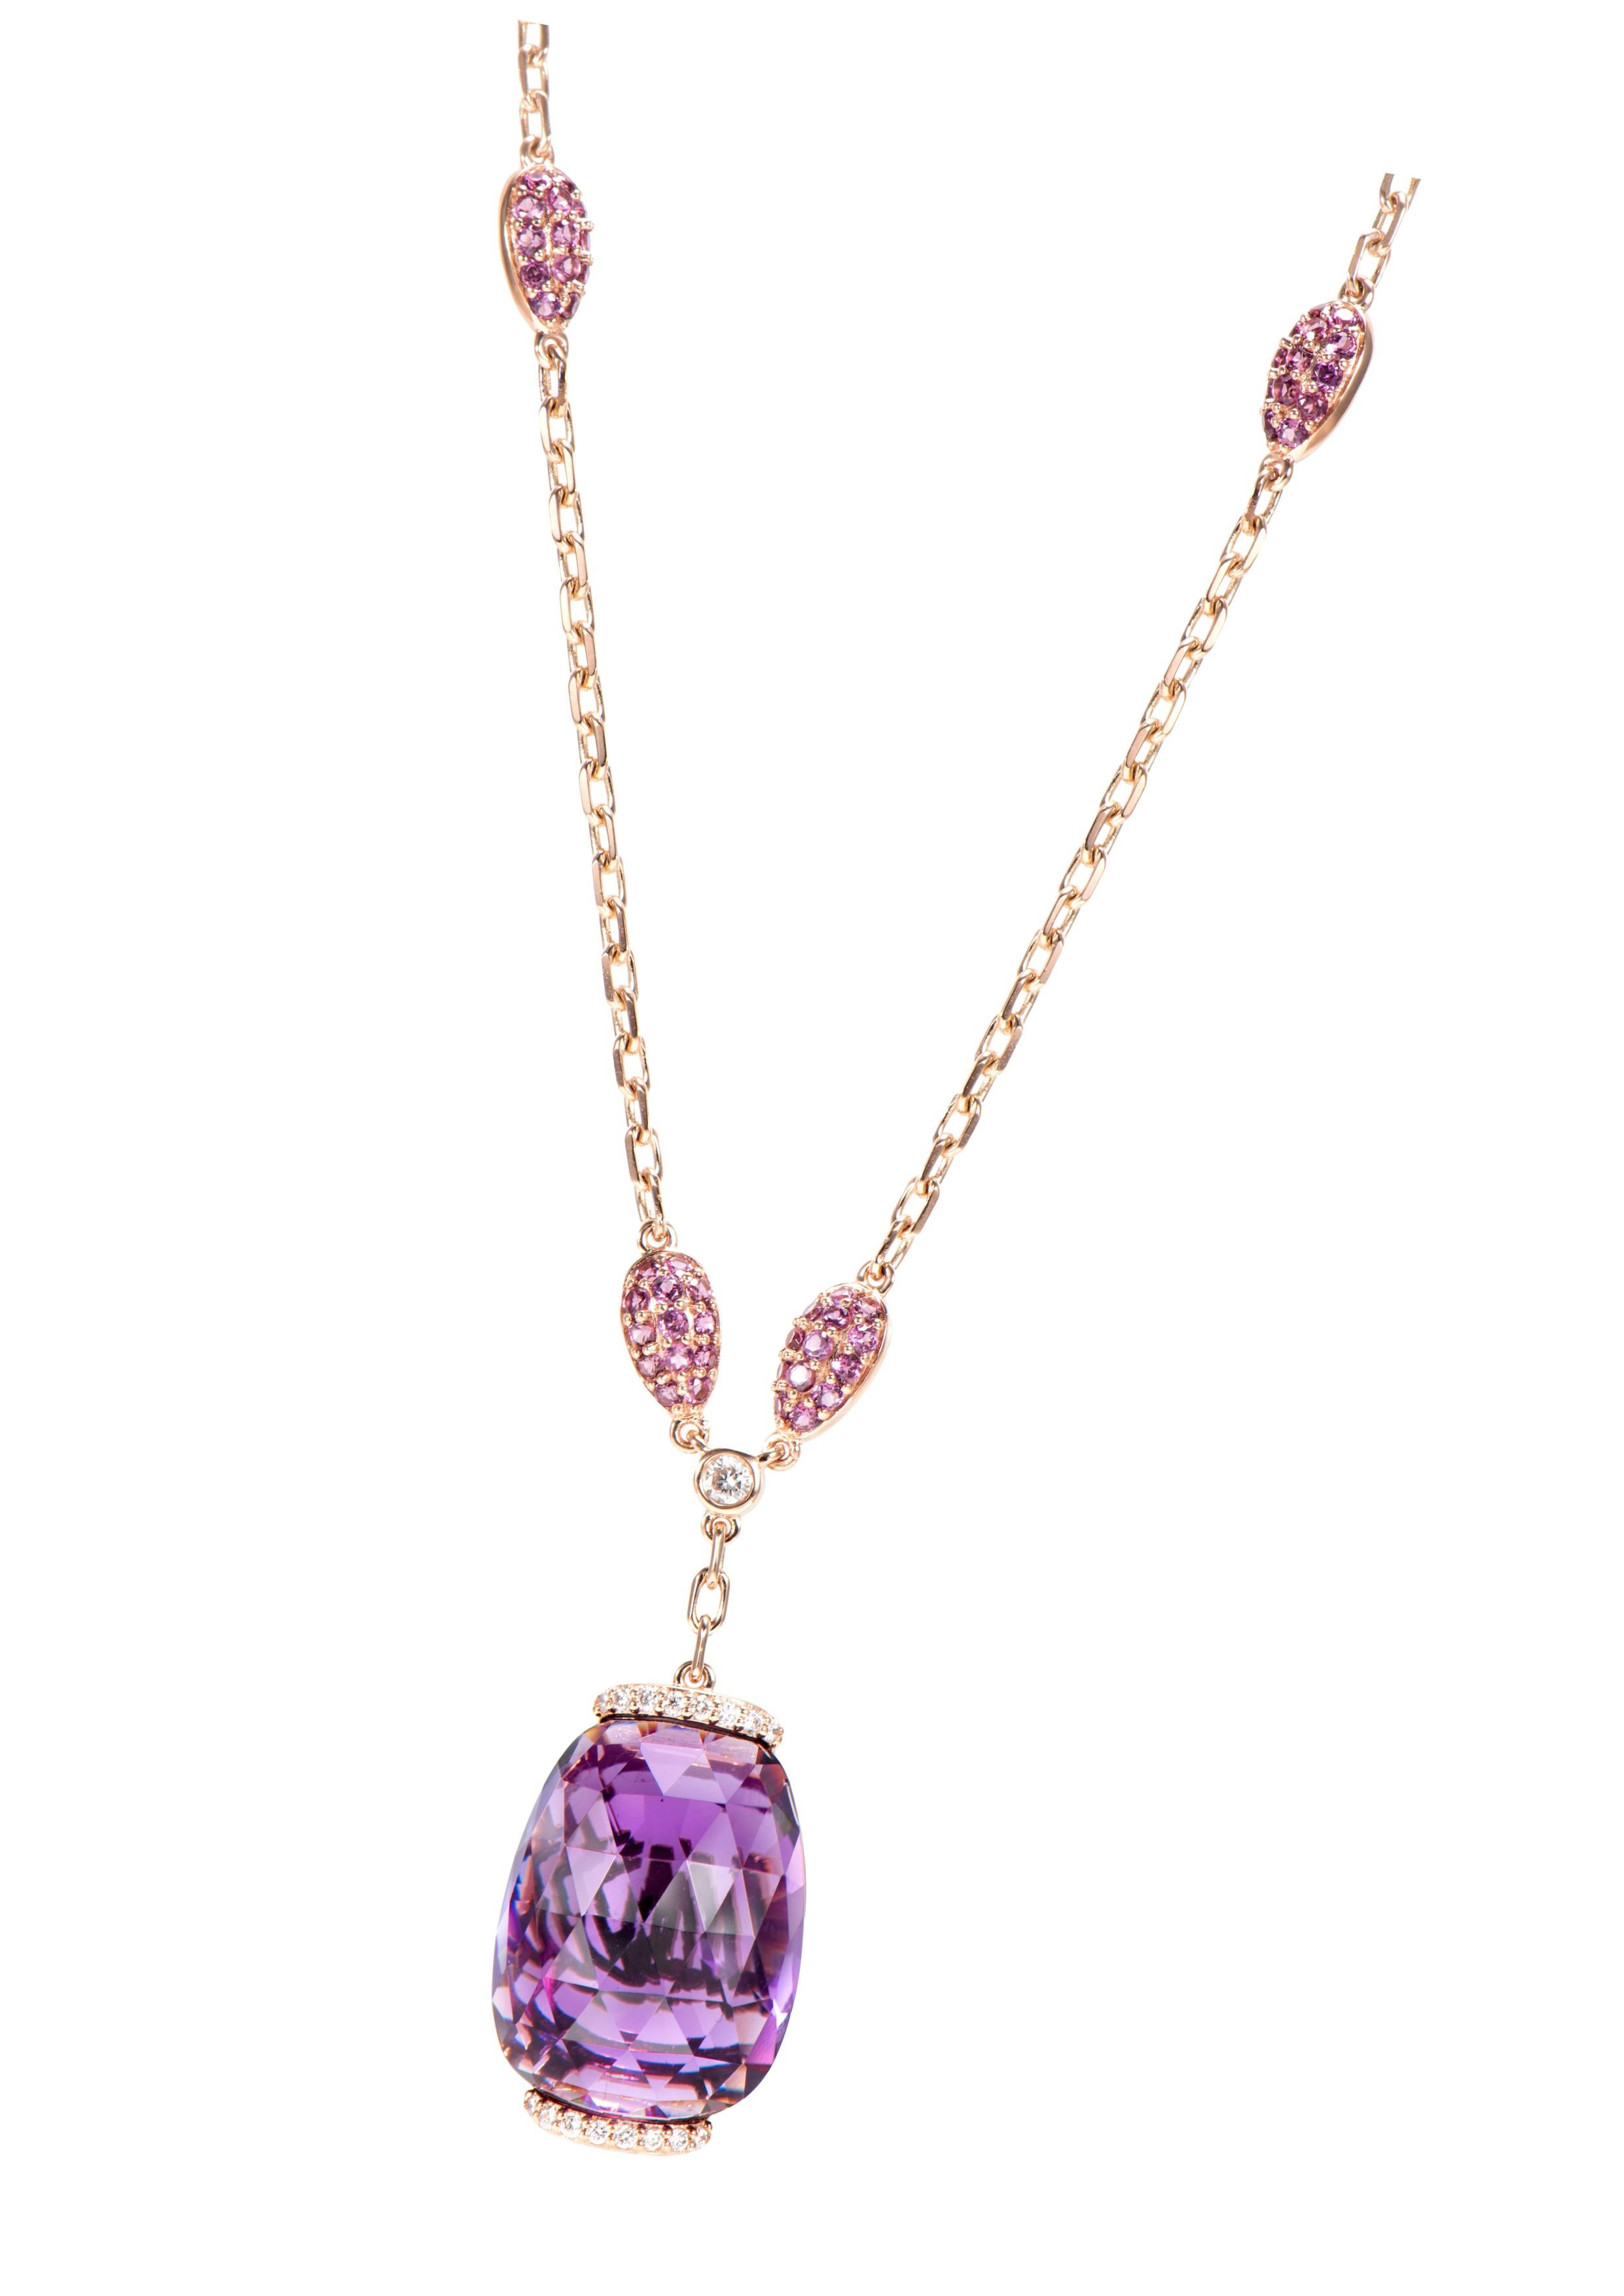 Cushion Cut Amethyst Pendant with Rhodolite and White Diamond in 18 Karat Rose Gold. For Sale